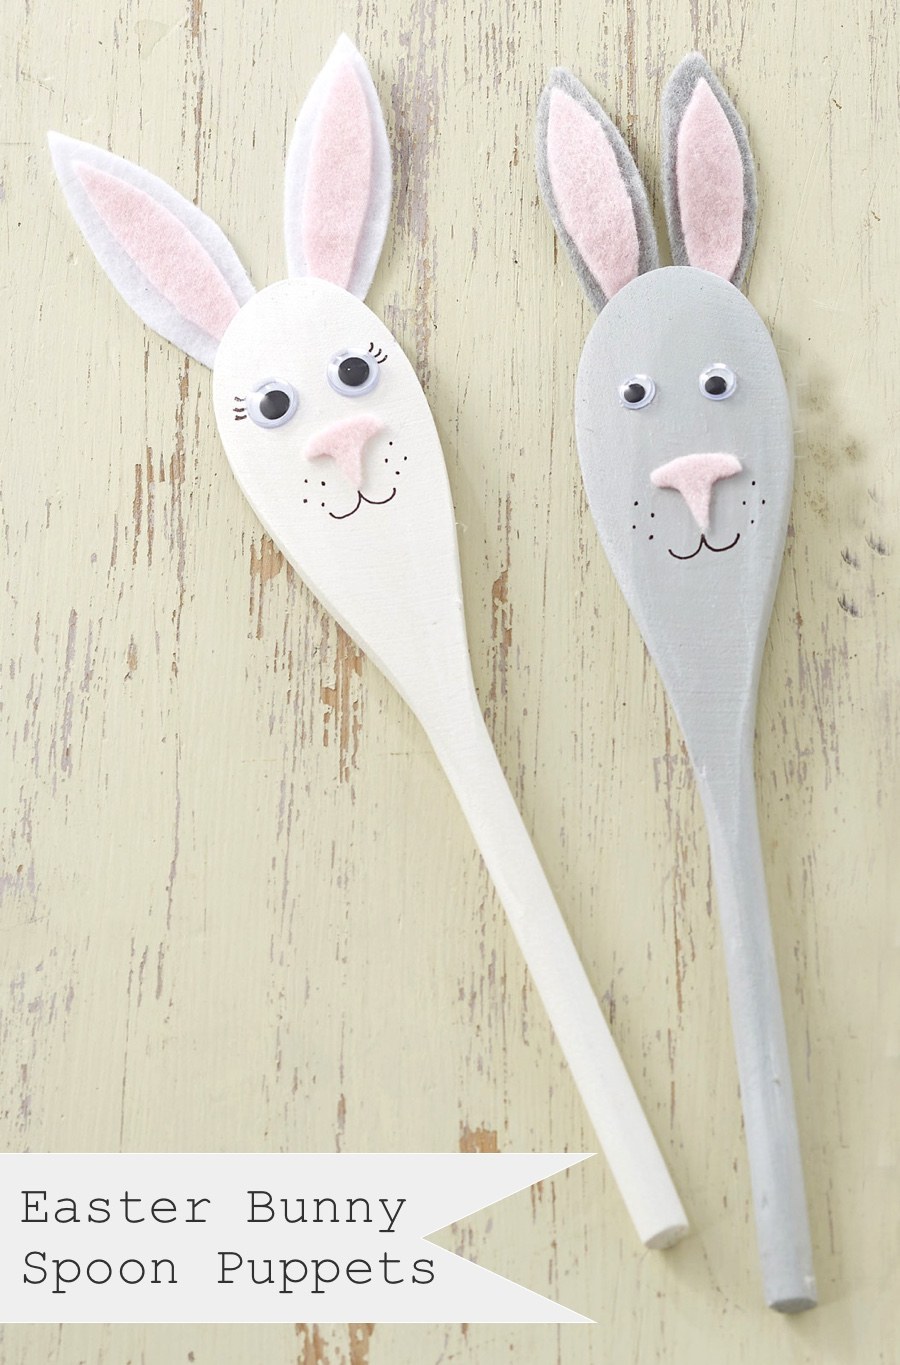 Easter Bunny Spoon Puppets